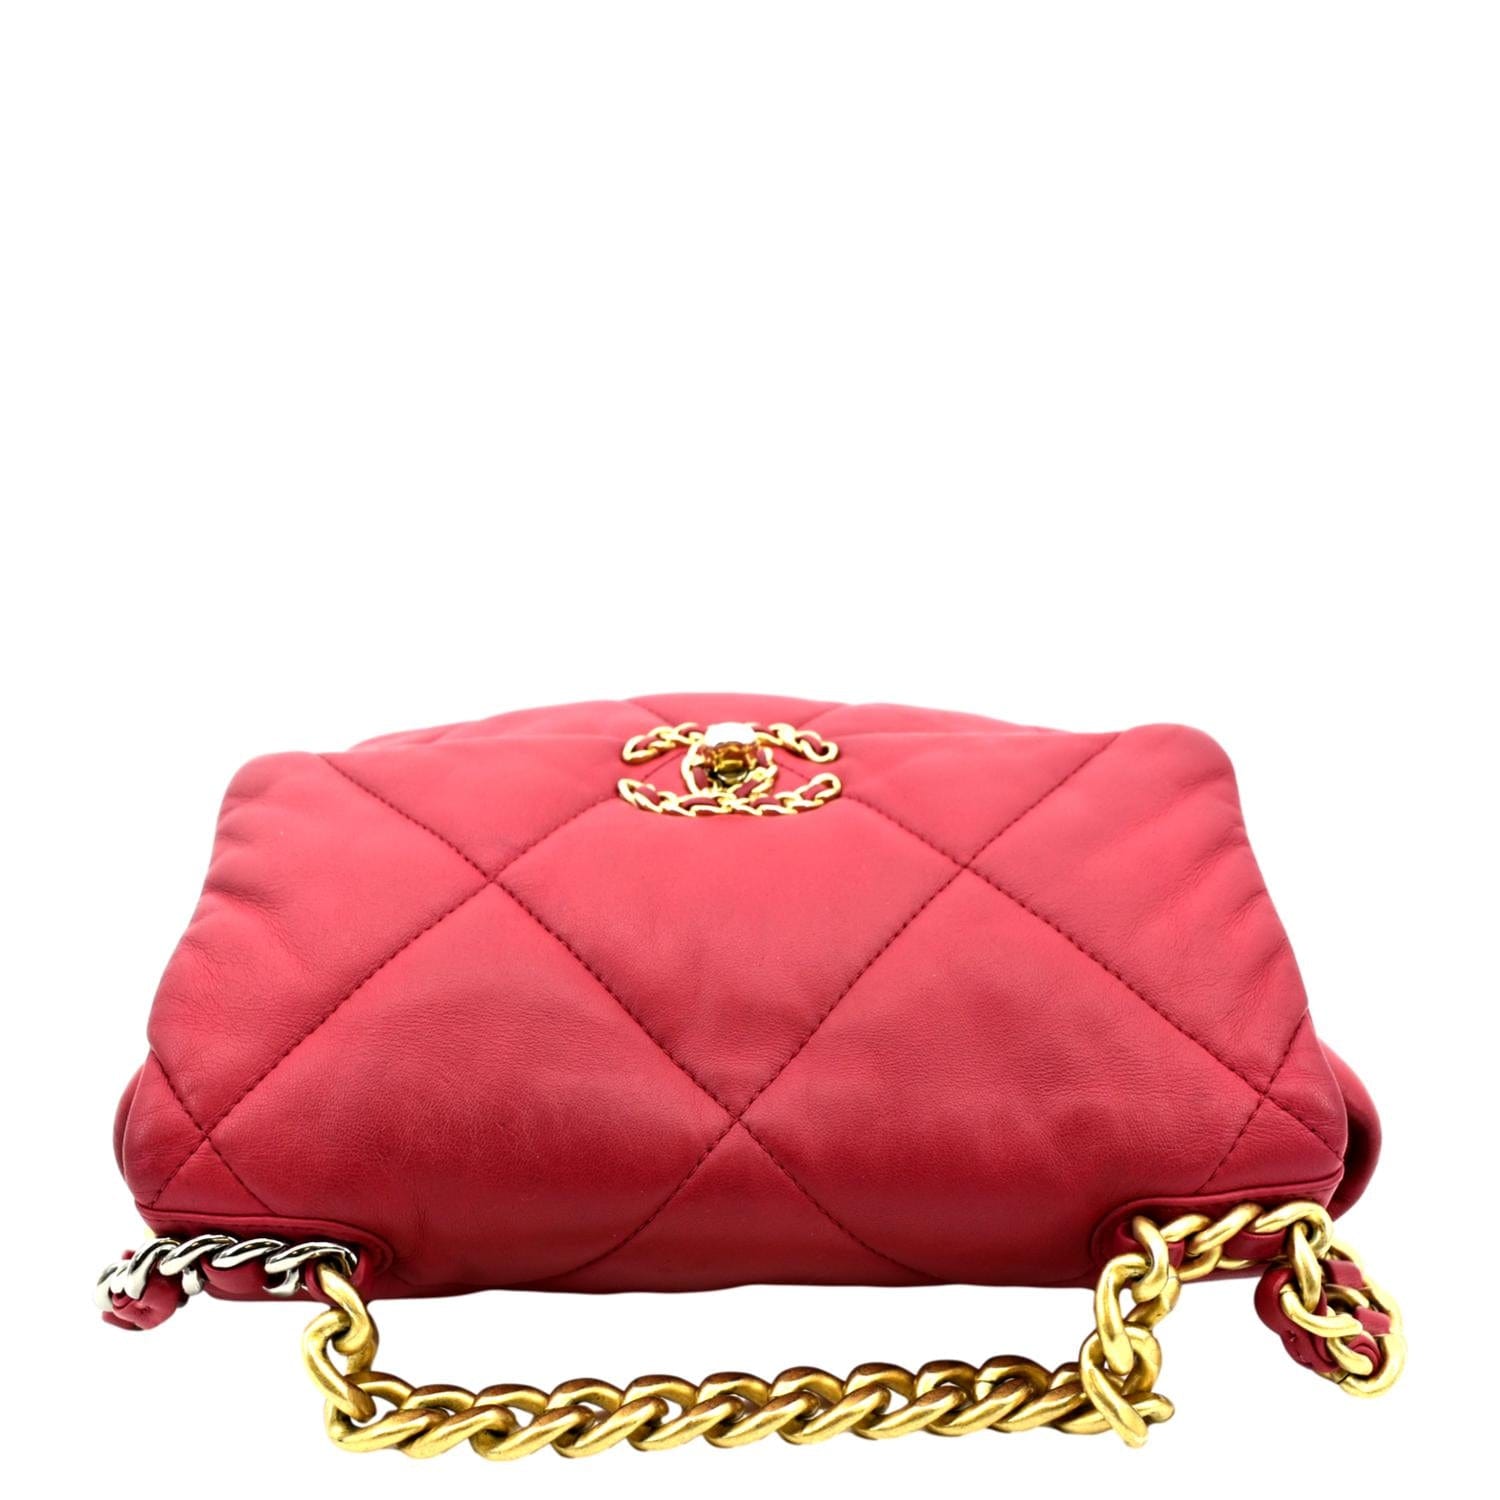 CHANEL Lambskin Quilted Medium Chanel 19 Flap Red 1215534